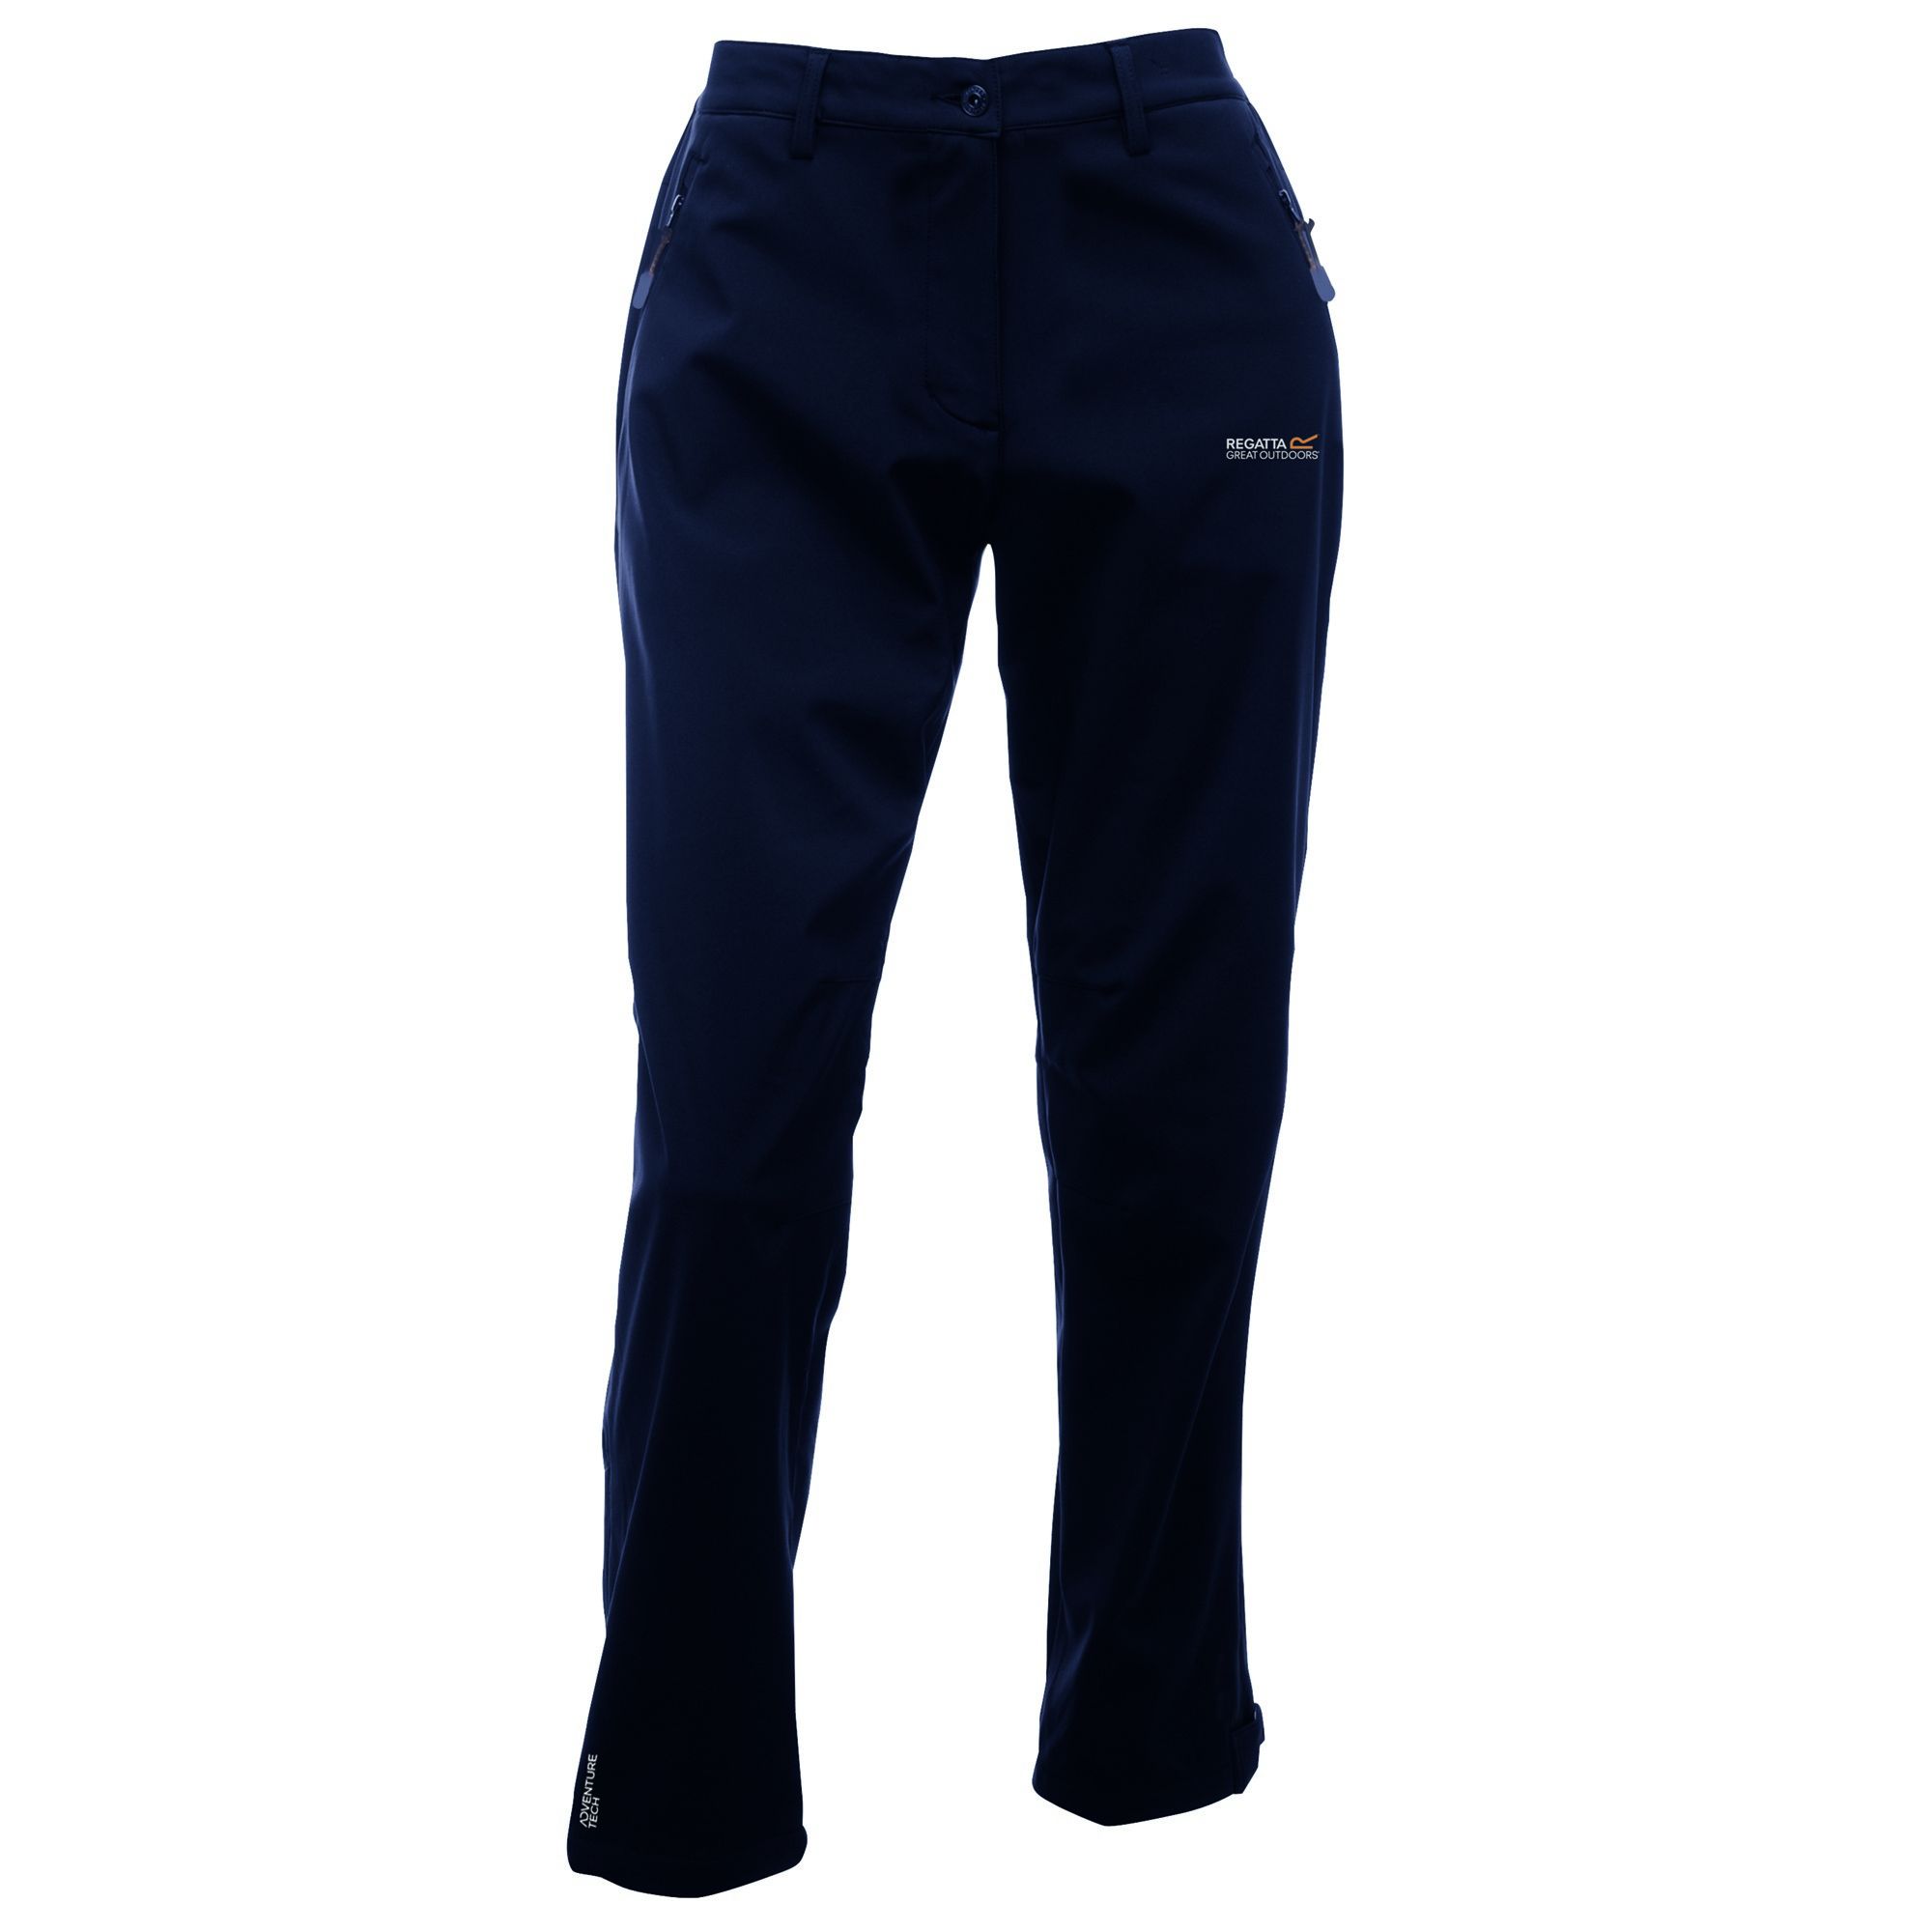 The womens Geo Softshell XPT II Trousers use a breathable, wind resistant membrane with a DWR (Durable Water Repellent) finish for maximum comfort on demanding days. They stave off showers and gales and keep you warm while allowing superb mobility. Packed with handy pockets and part elastic at the waist for comfort as you move, they have proven to be a best-selling performance trousers year-on-year. Leg length - 29ins. Regatta Womens sizing (waist approx): 6 (23in/58cm), 8 (25in/63cm), 10 (27in/68cm), 12 (29in/74cm), 14 (31in/79cm), 16 (33in/84cm), 18 (36in/91cm), 20 (38in/96cm), 22 (41in/104cm), 24 (43in/109cm), 26 (45in/114cm), 28 (47in/119cm), 30 (49in/124cm), 32 (51in/129cm), 34 (53in/135cm), 36 (55in/140cm). 4% Elastane, 96% Polyester.